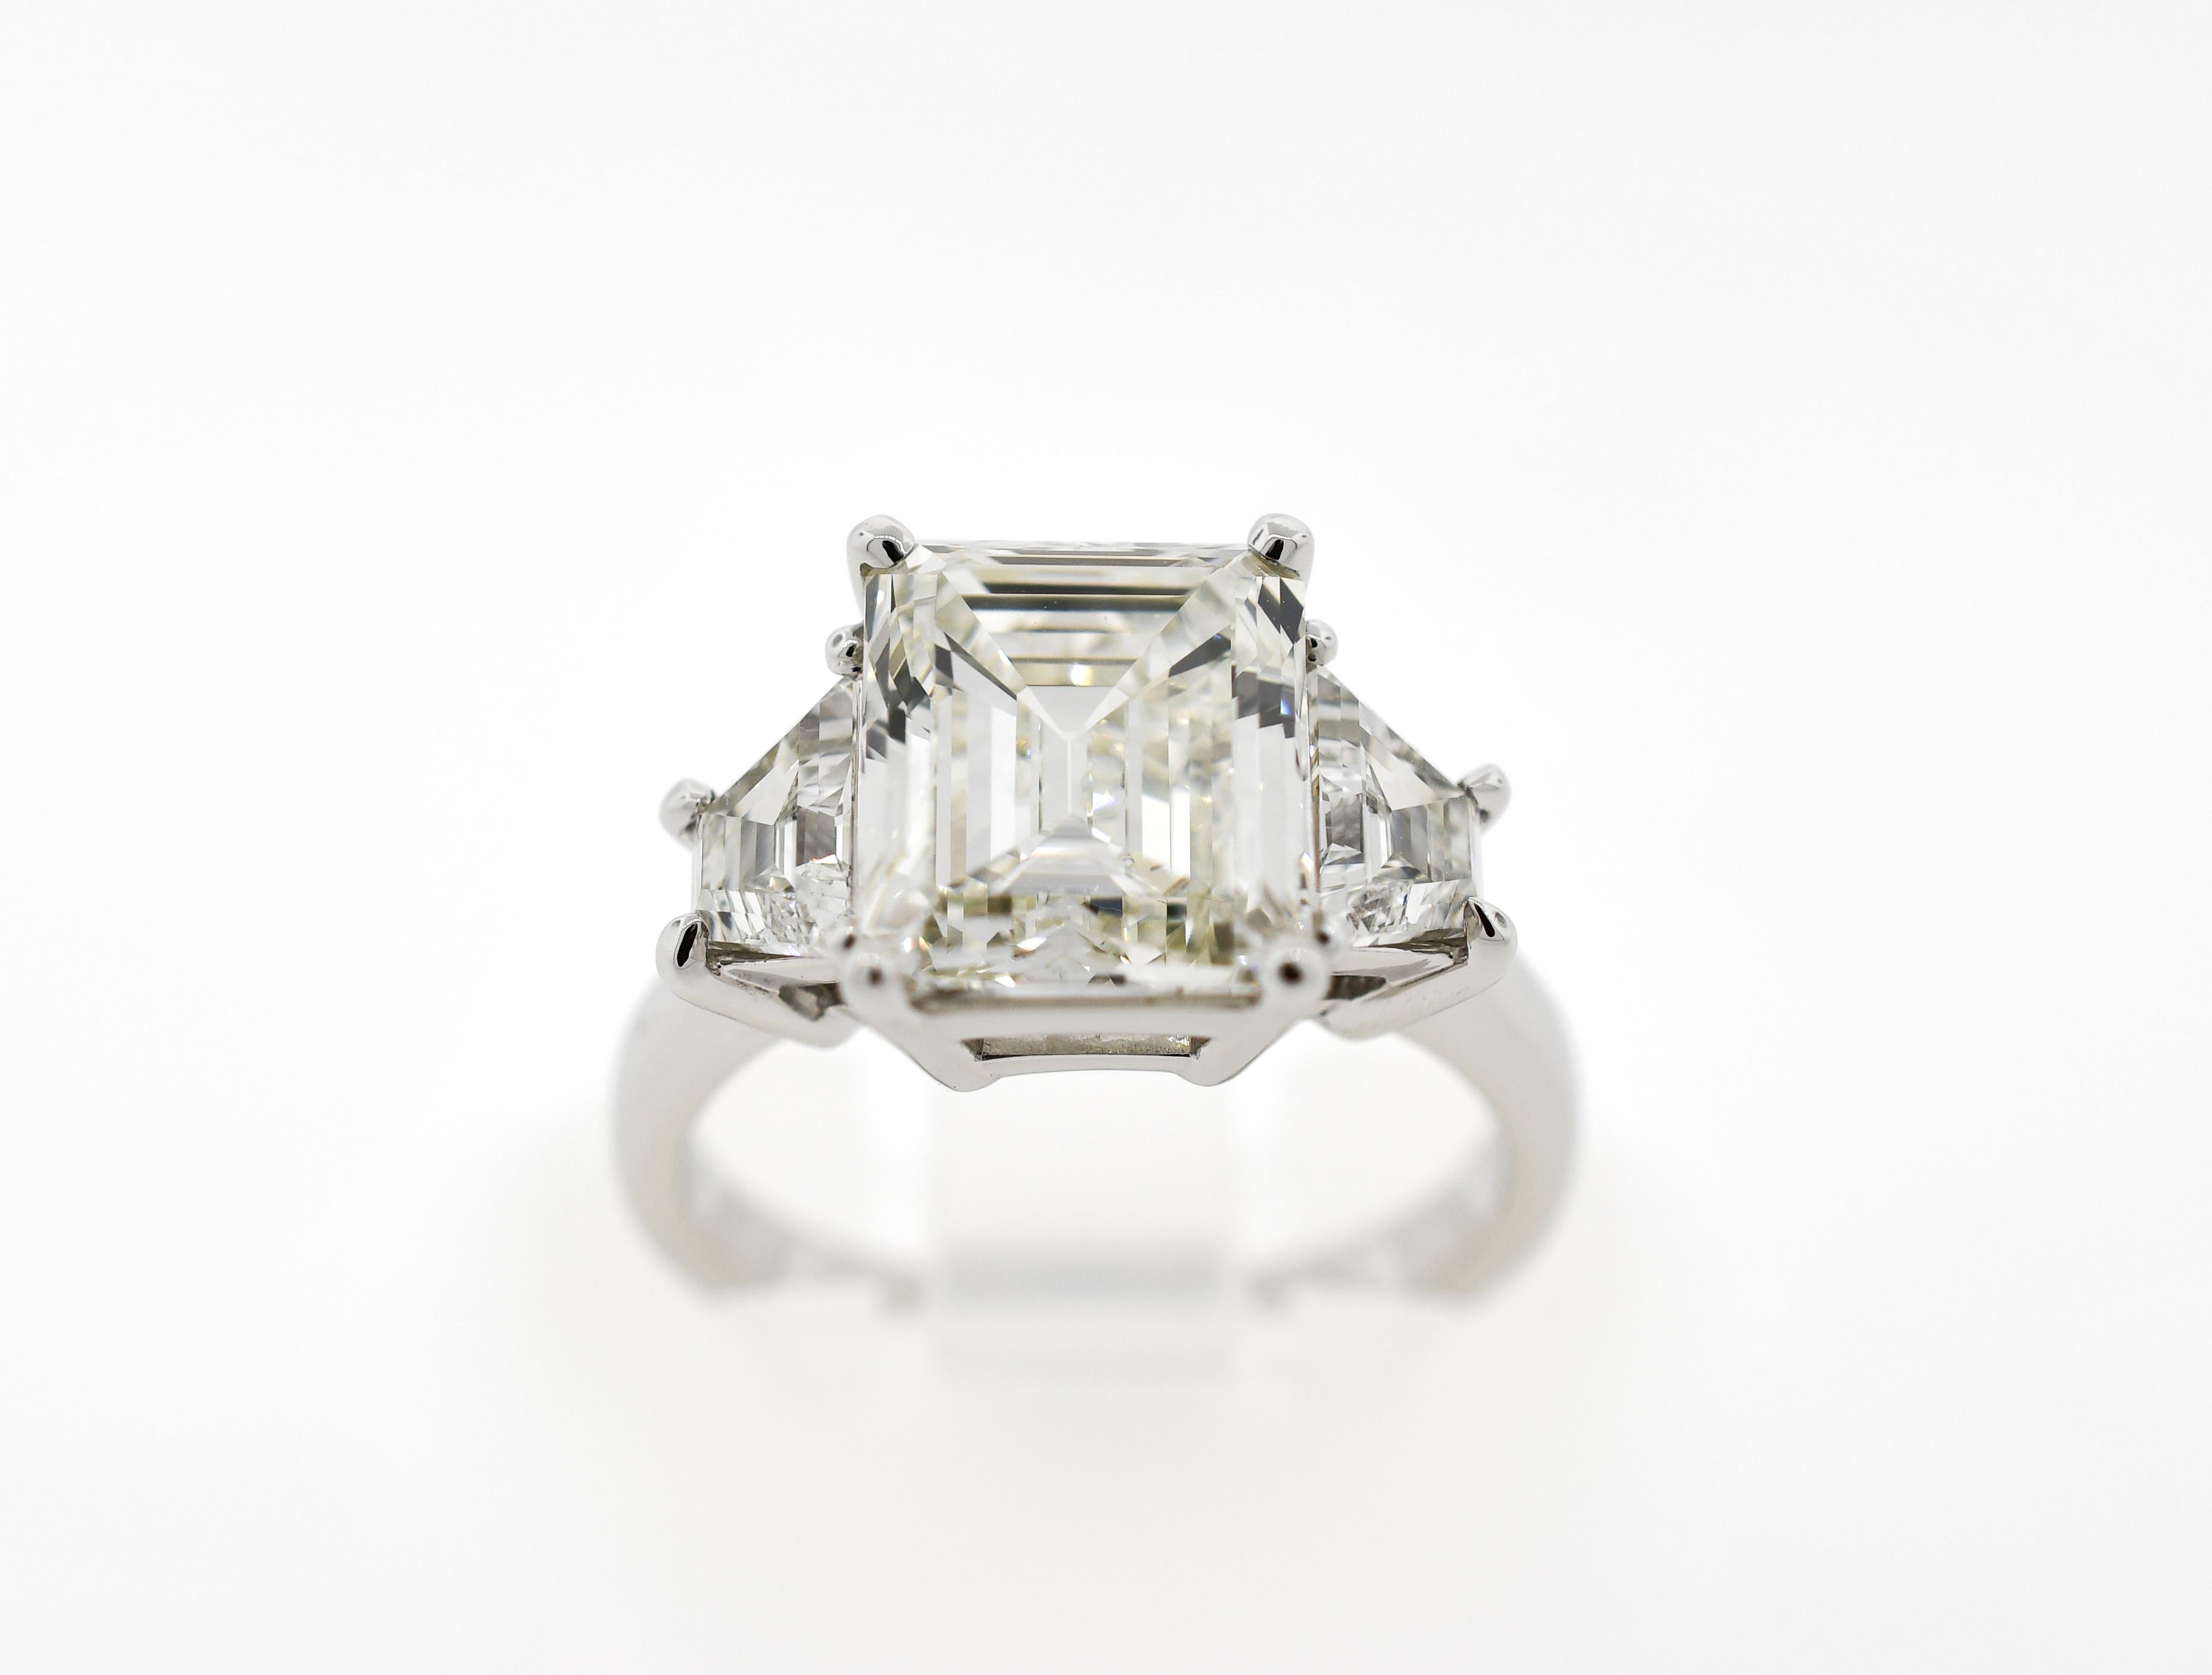 Custom made platinum three stone contemporary mounting, centered by one (1) emerald cut diamond weighing 4.05 carats, flanked by two (2) trapezoid cut diamonds weighing .94 carats total weight, VS1 clarity, H color.  Finger size 6.25
Center stone